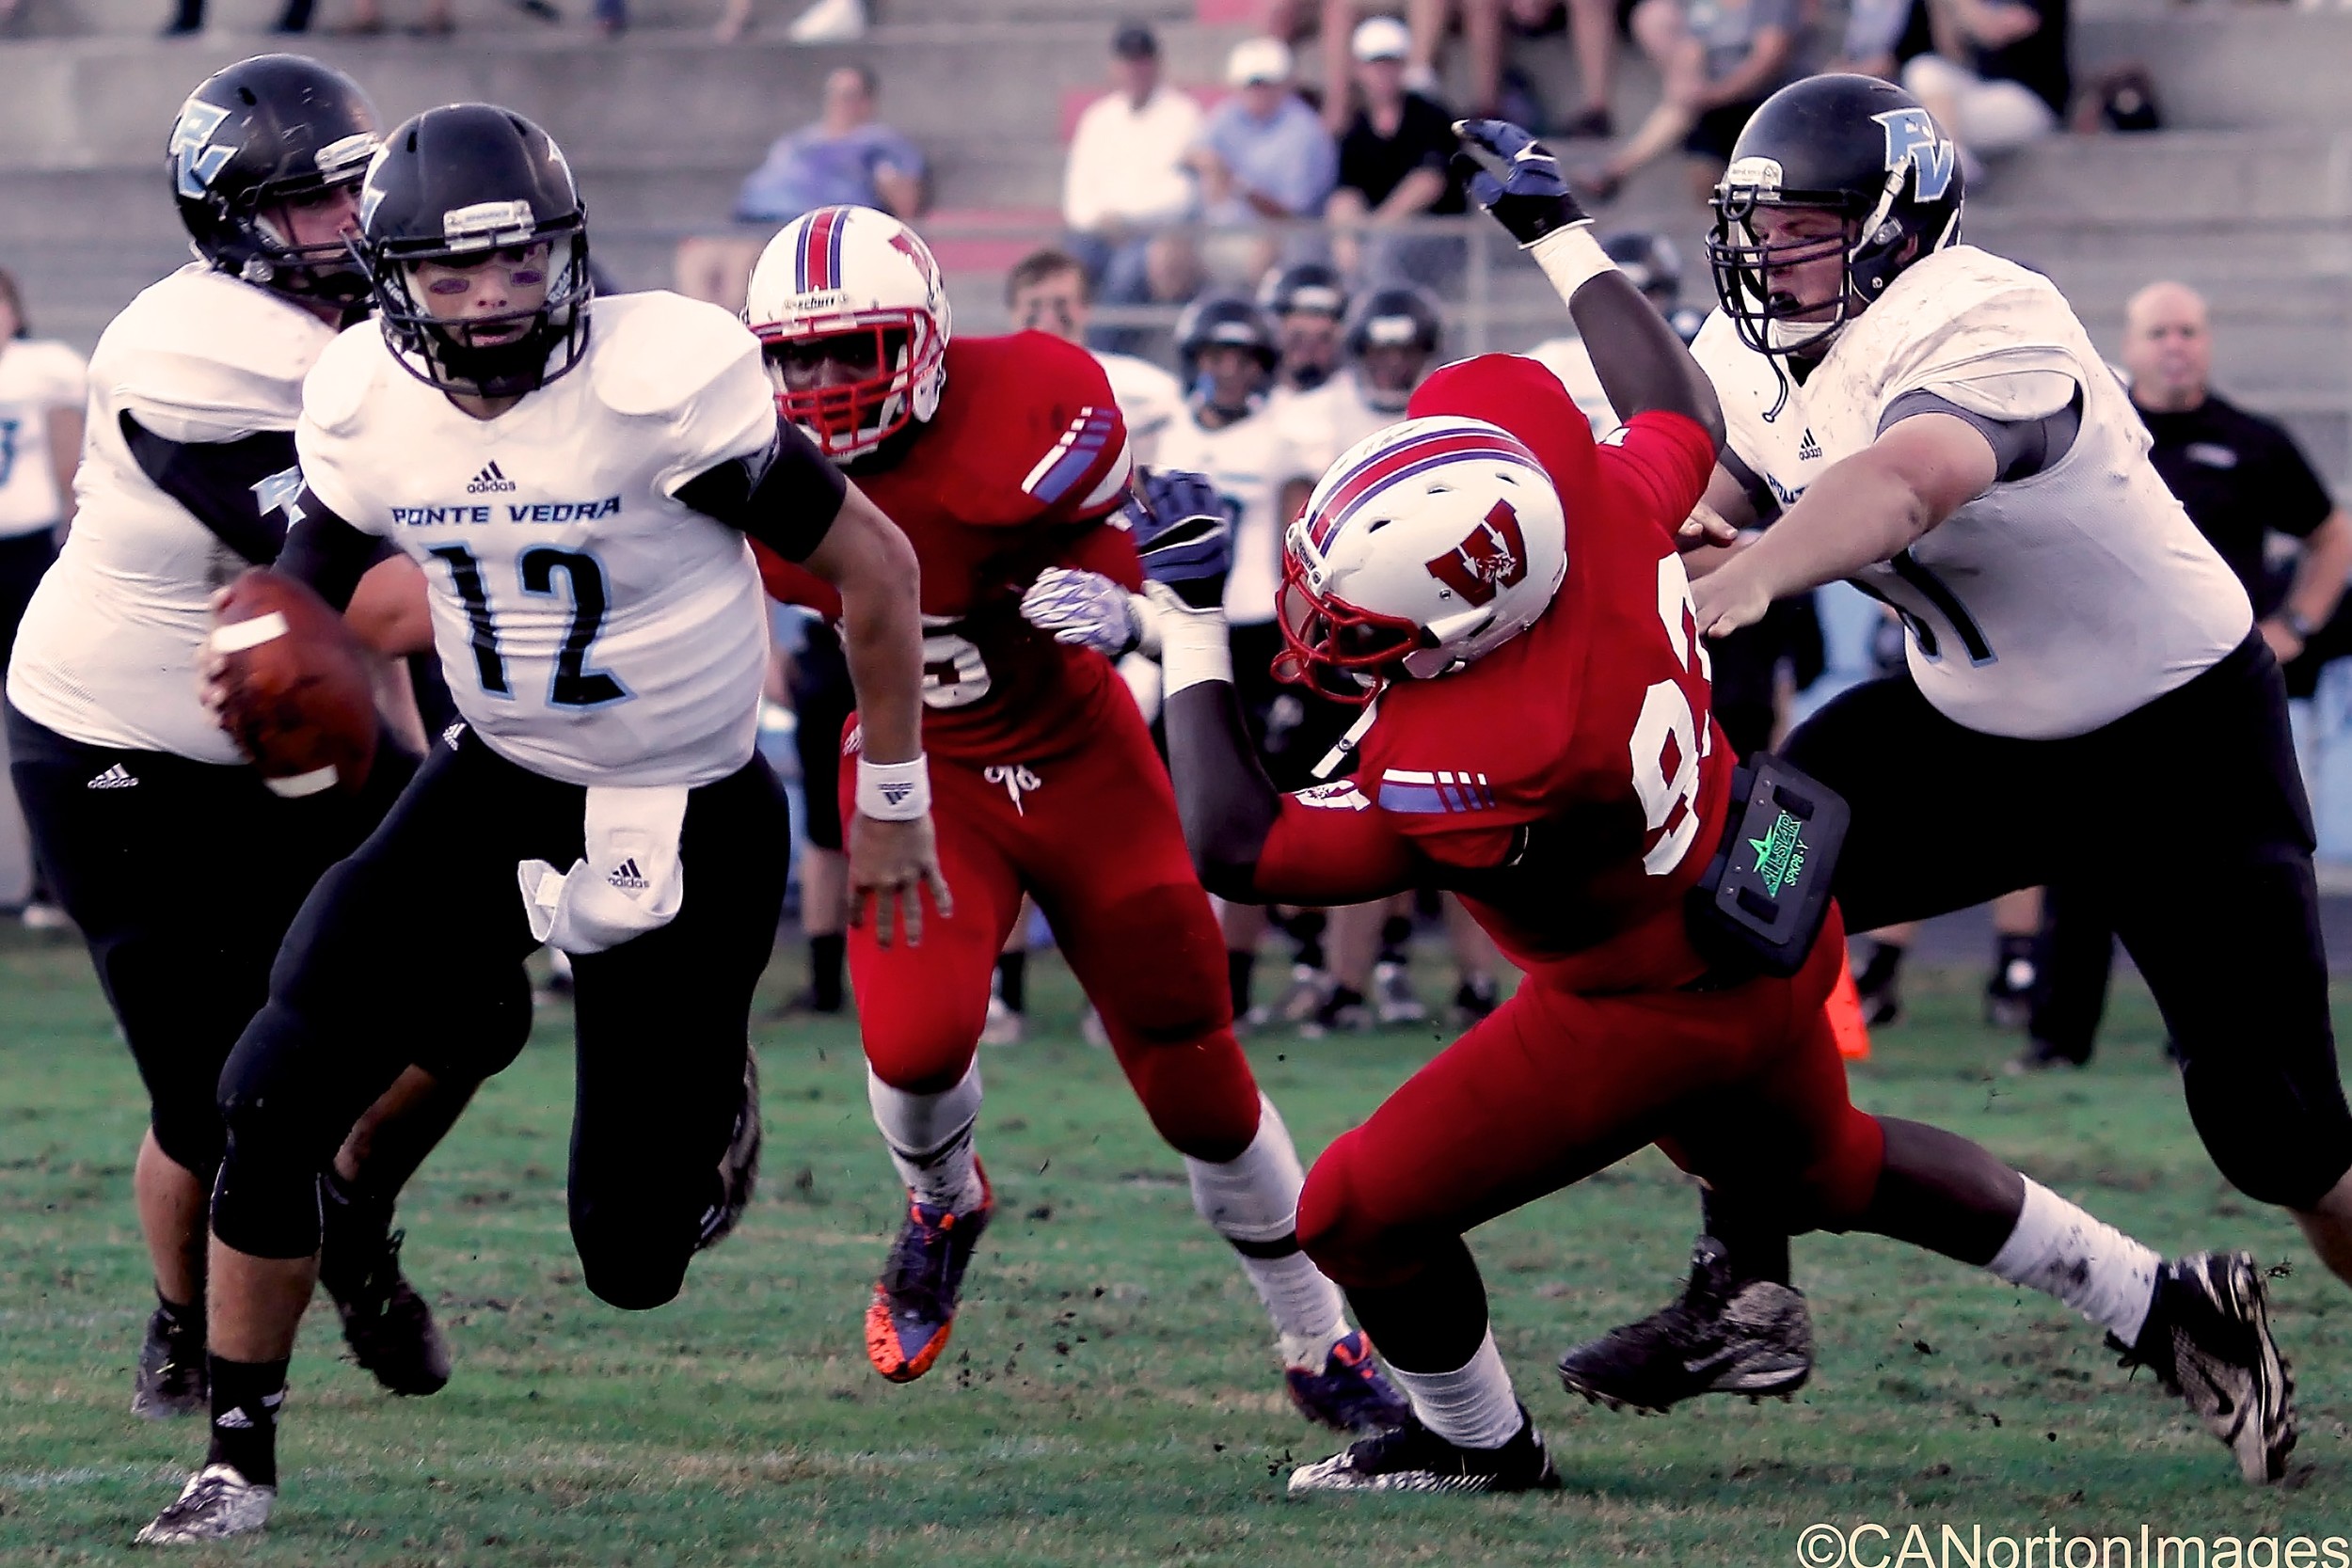 #12 Nick Tronti runs for a touchdown behind a block from #71 Carter Lewis